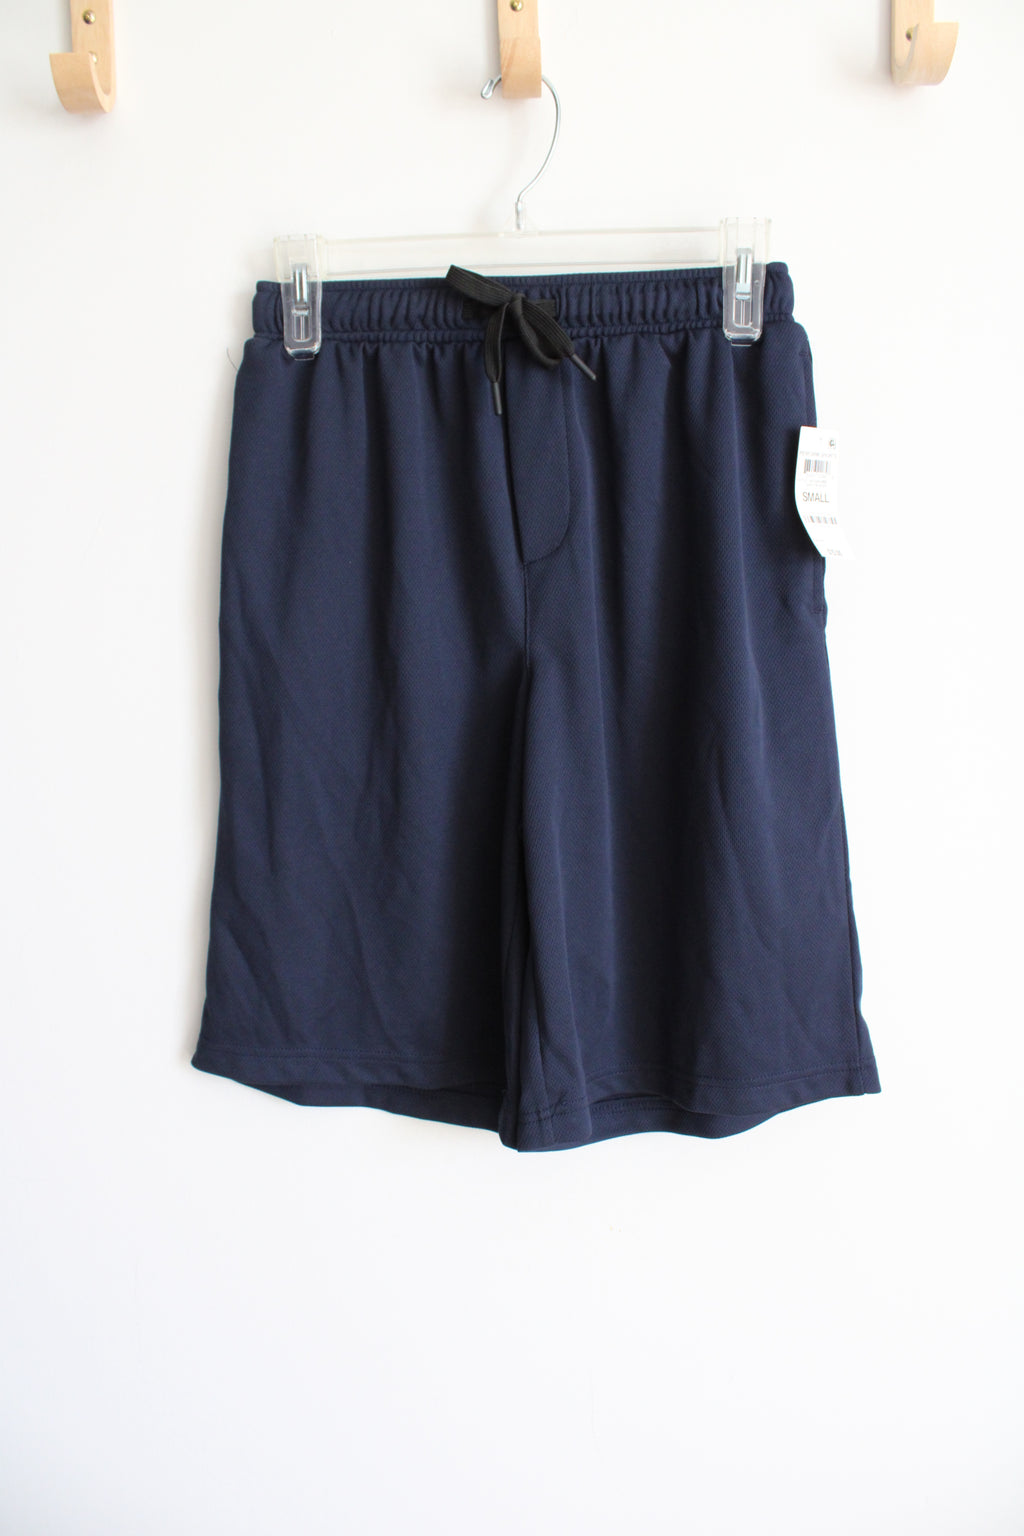 NEW Ideology Navy Blue Athletic Perform Shorts | S